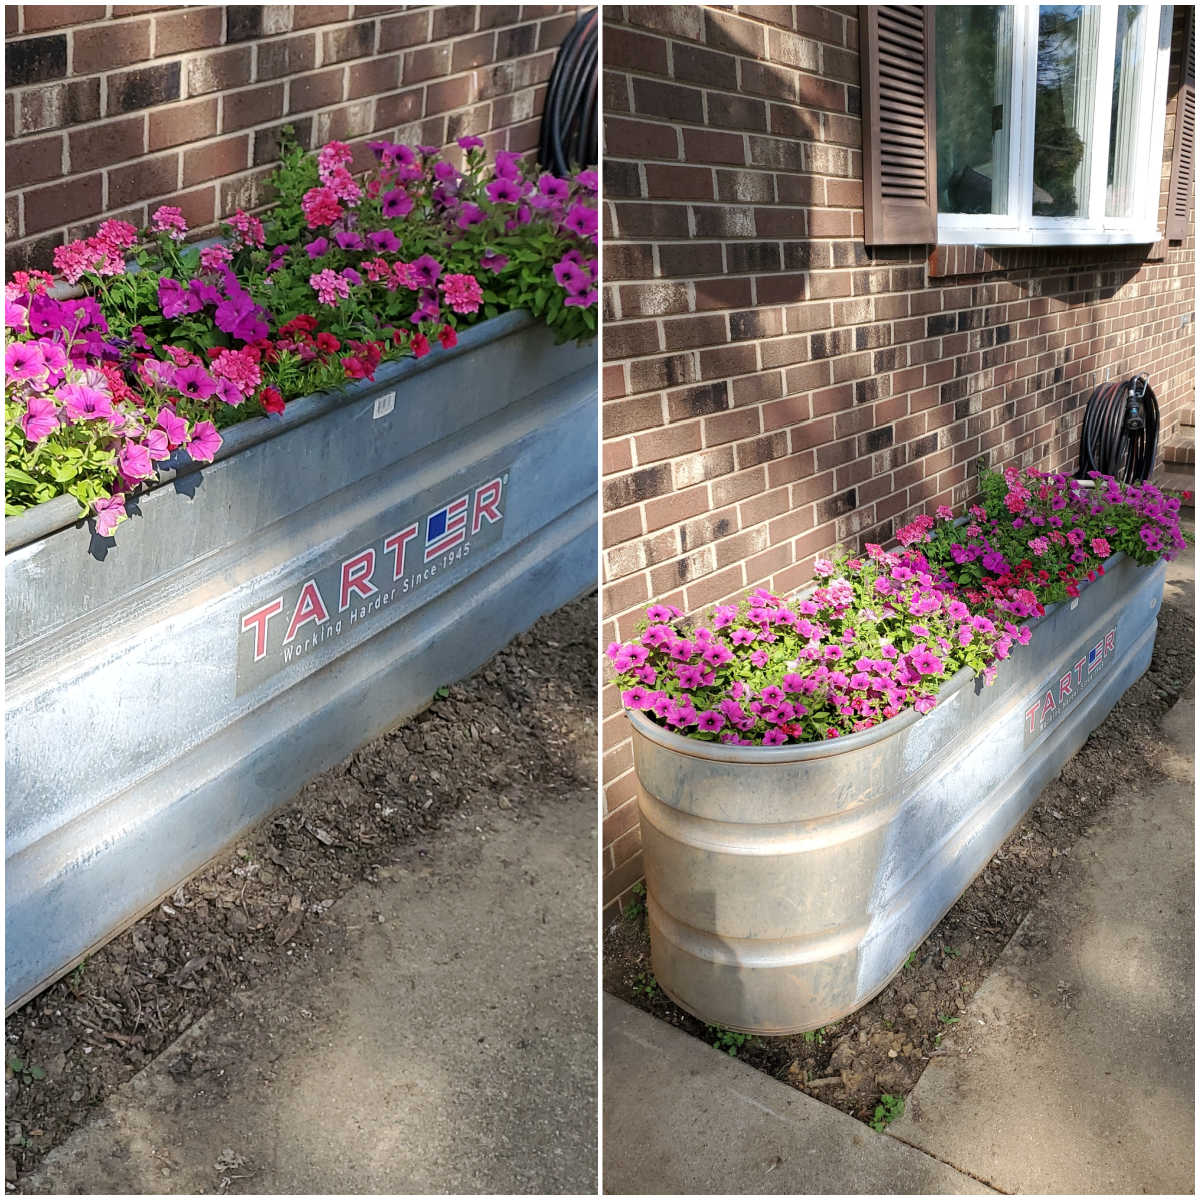 Tarter galvanized horse troughs used as raised flower beds with hot pink petunias.